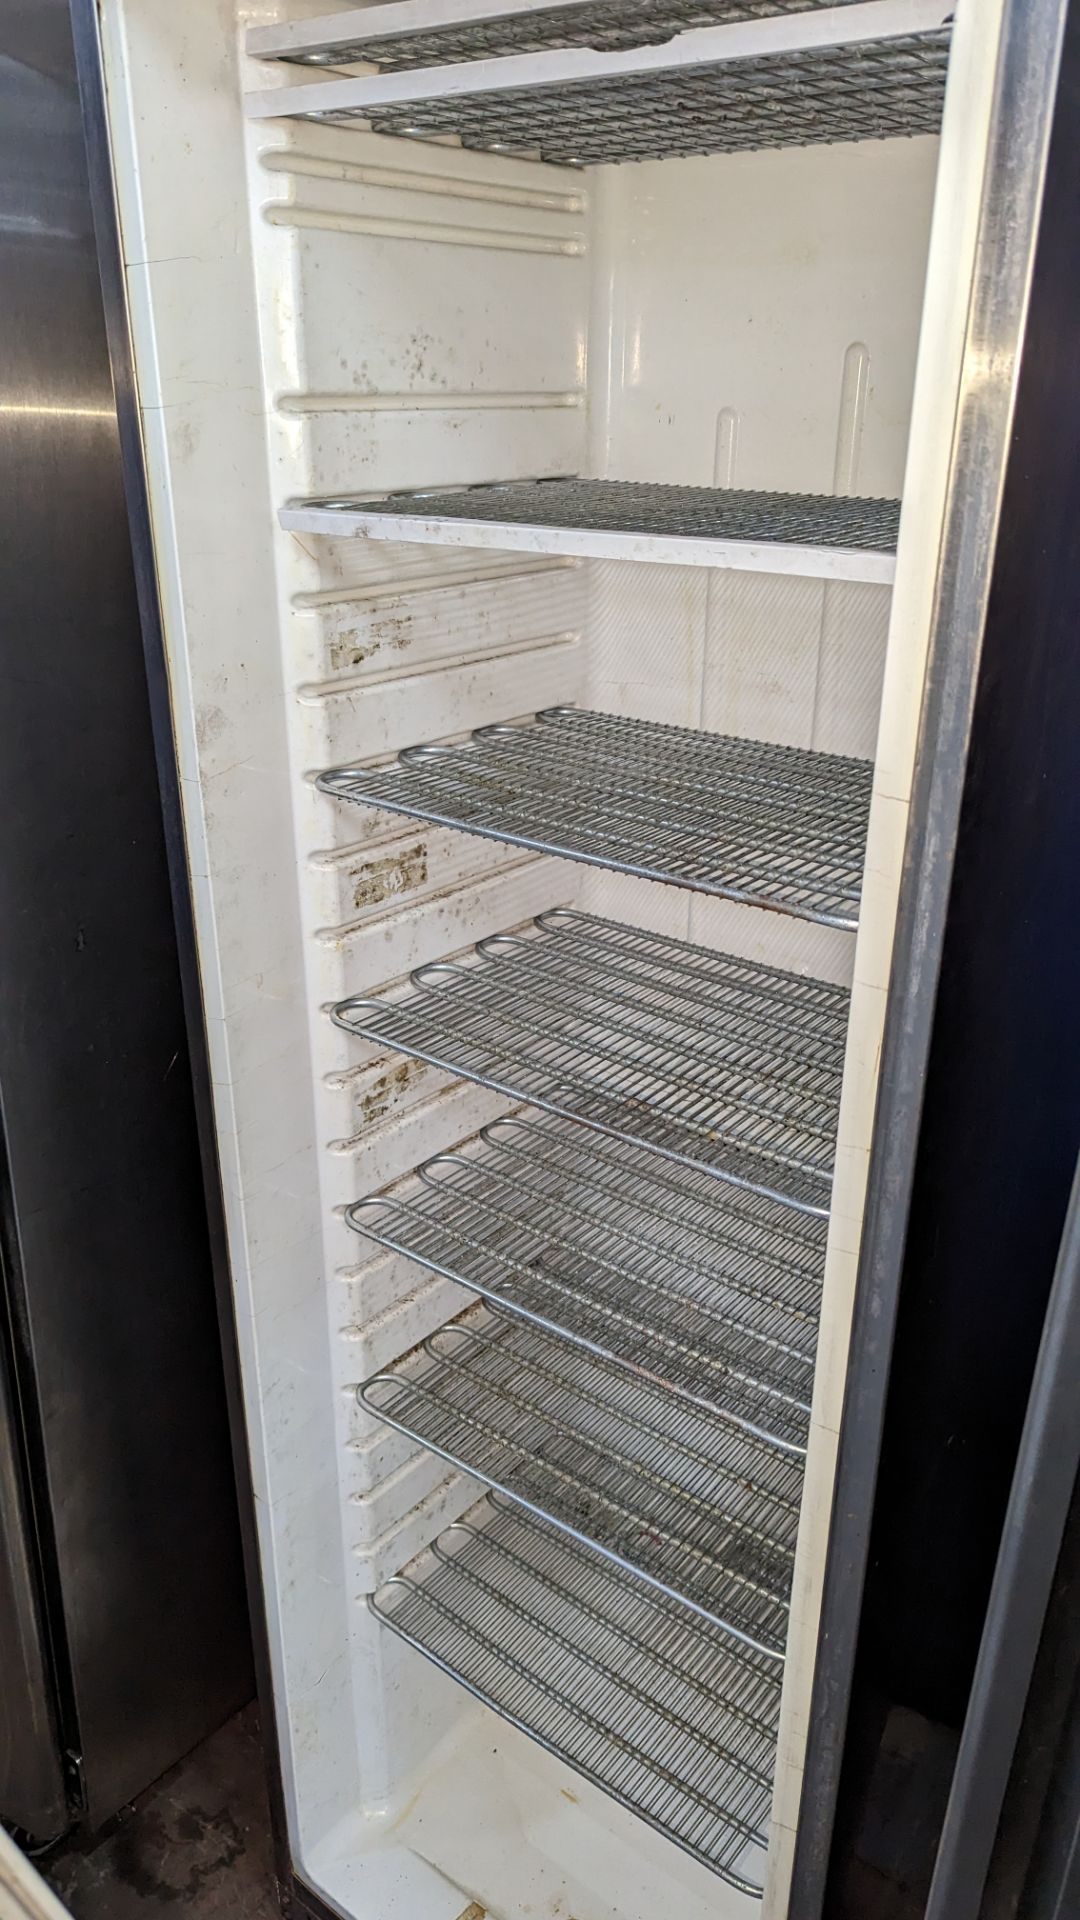 2 off tall stainless steel freezers. NB one freezer is damaged - Image 6 of 6